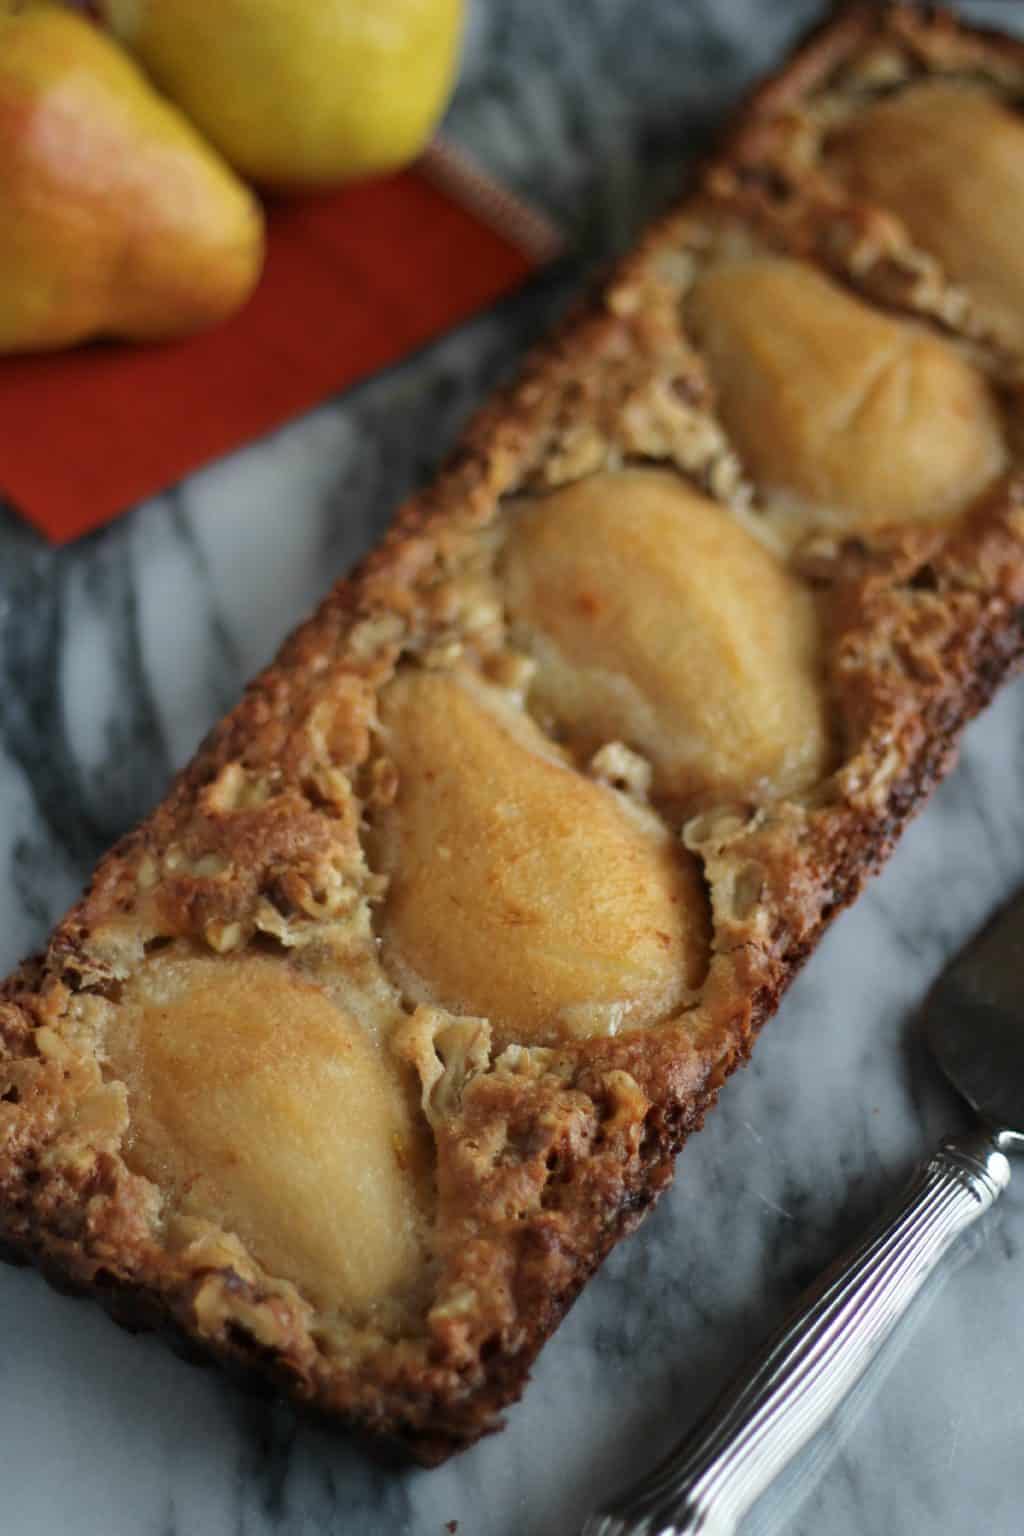 Gluten free pear and walnut tart freshly out of oven